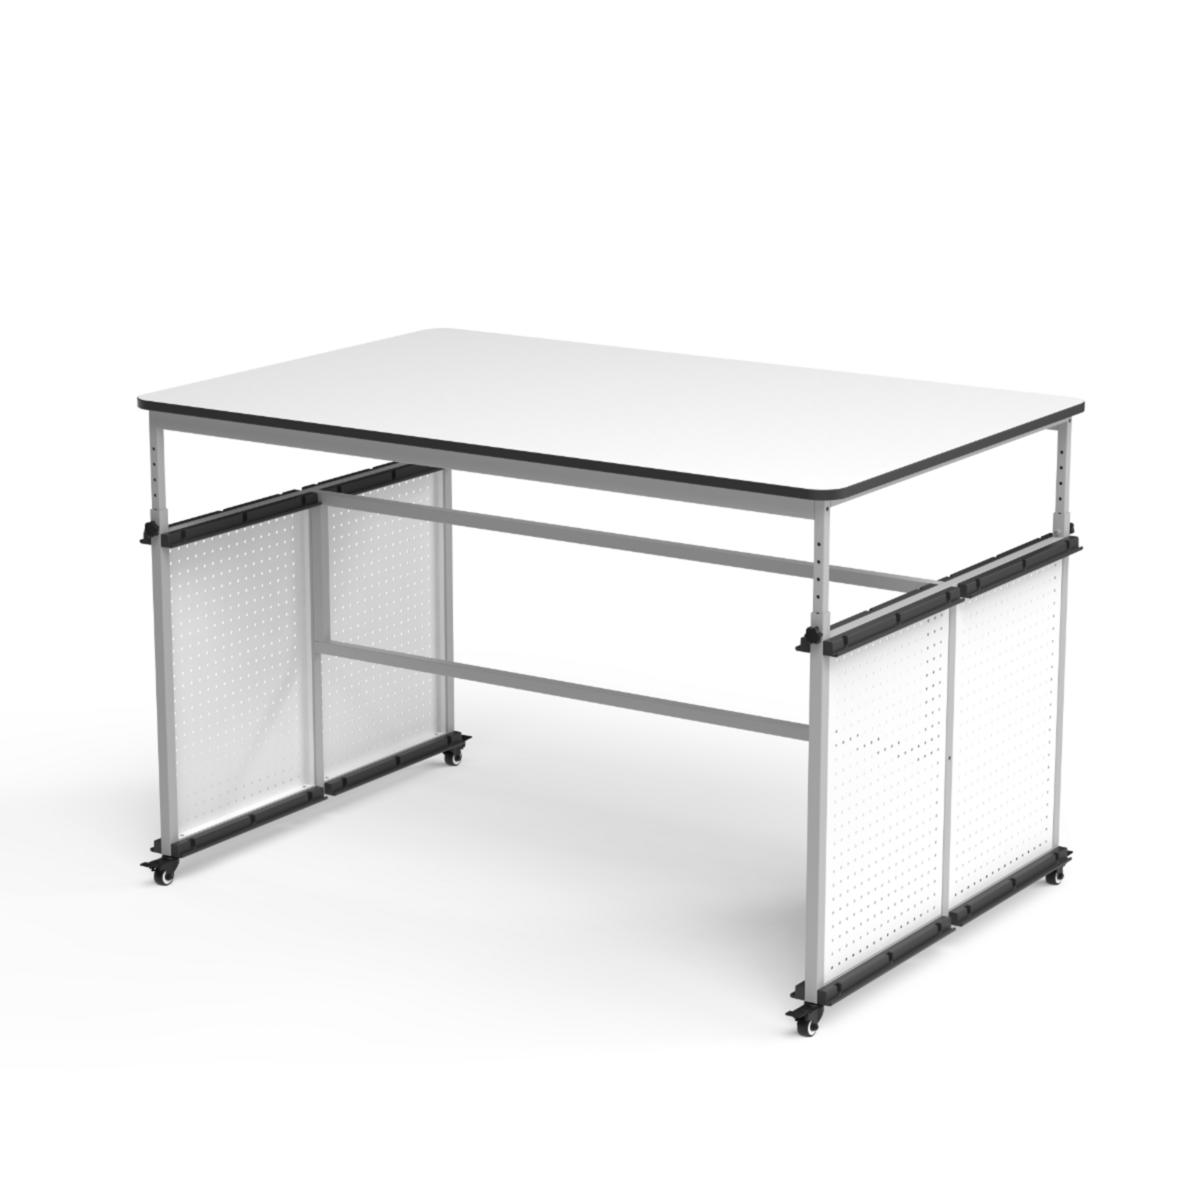 Modular Adjustable Height Makerspace and Science Lab Table